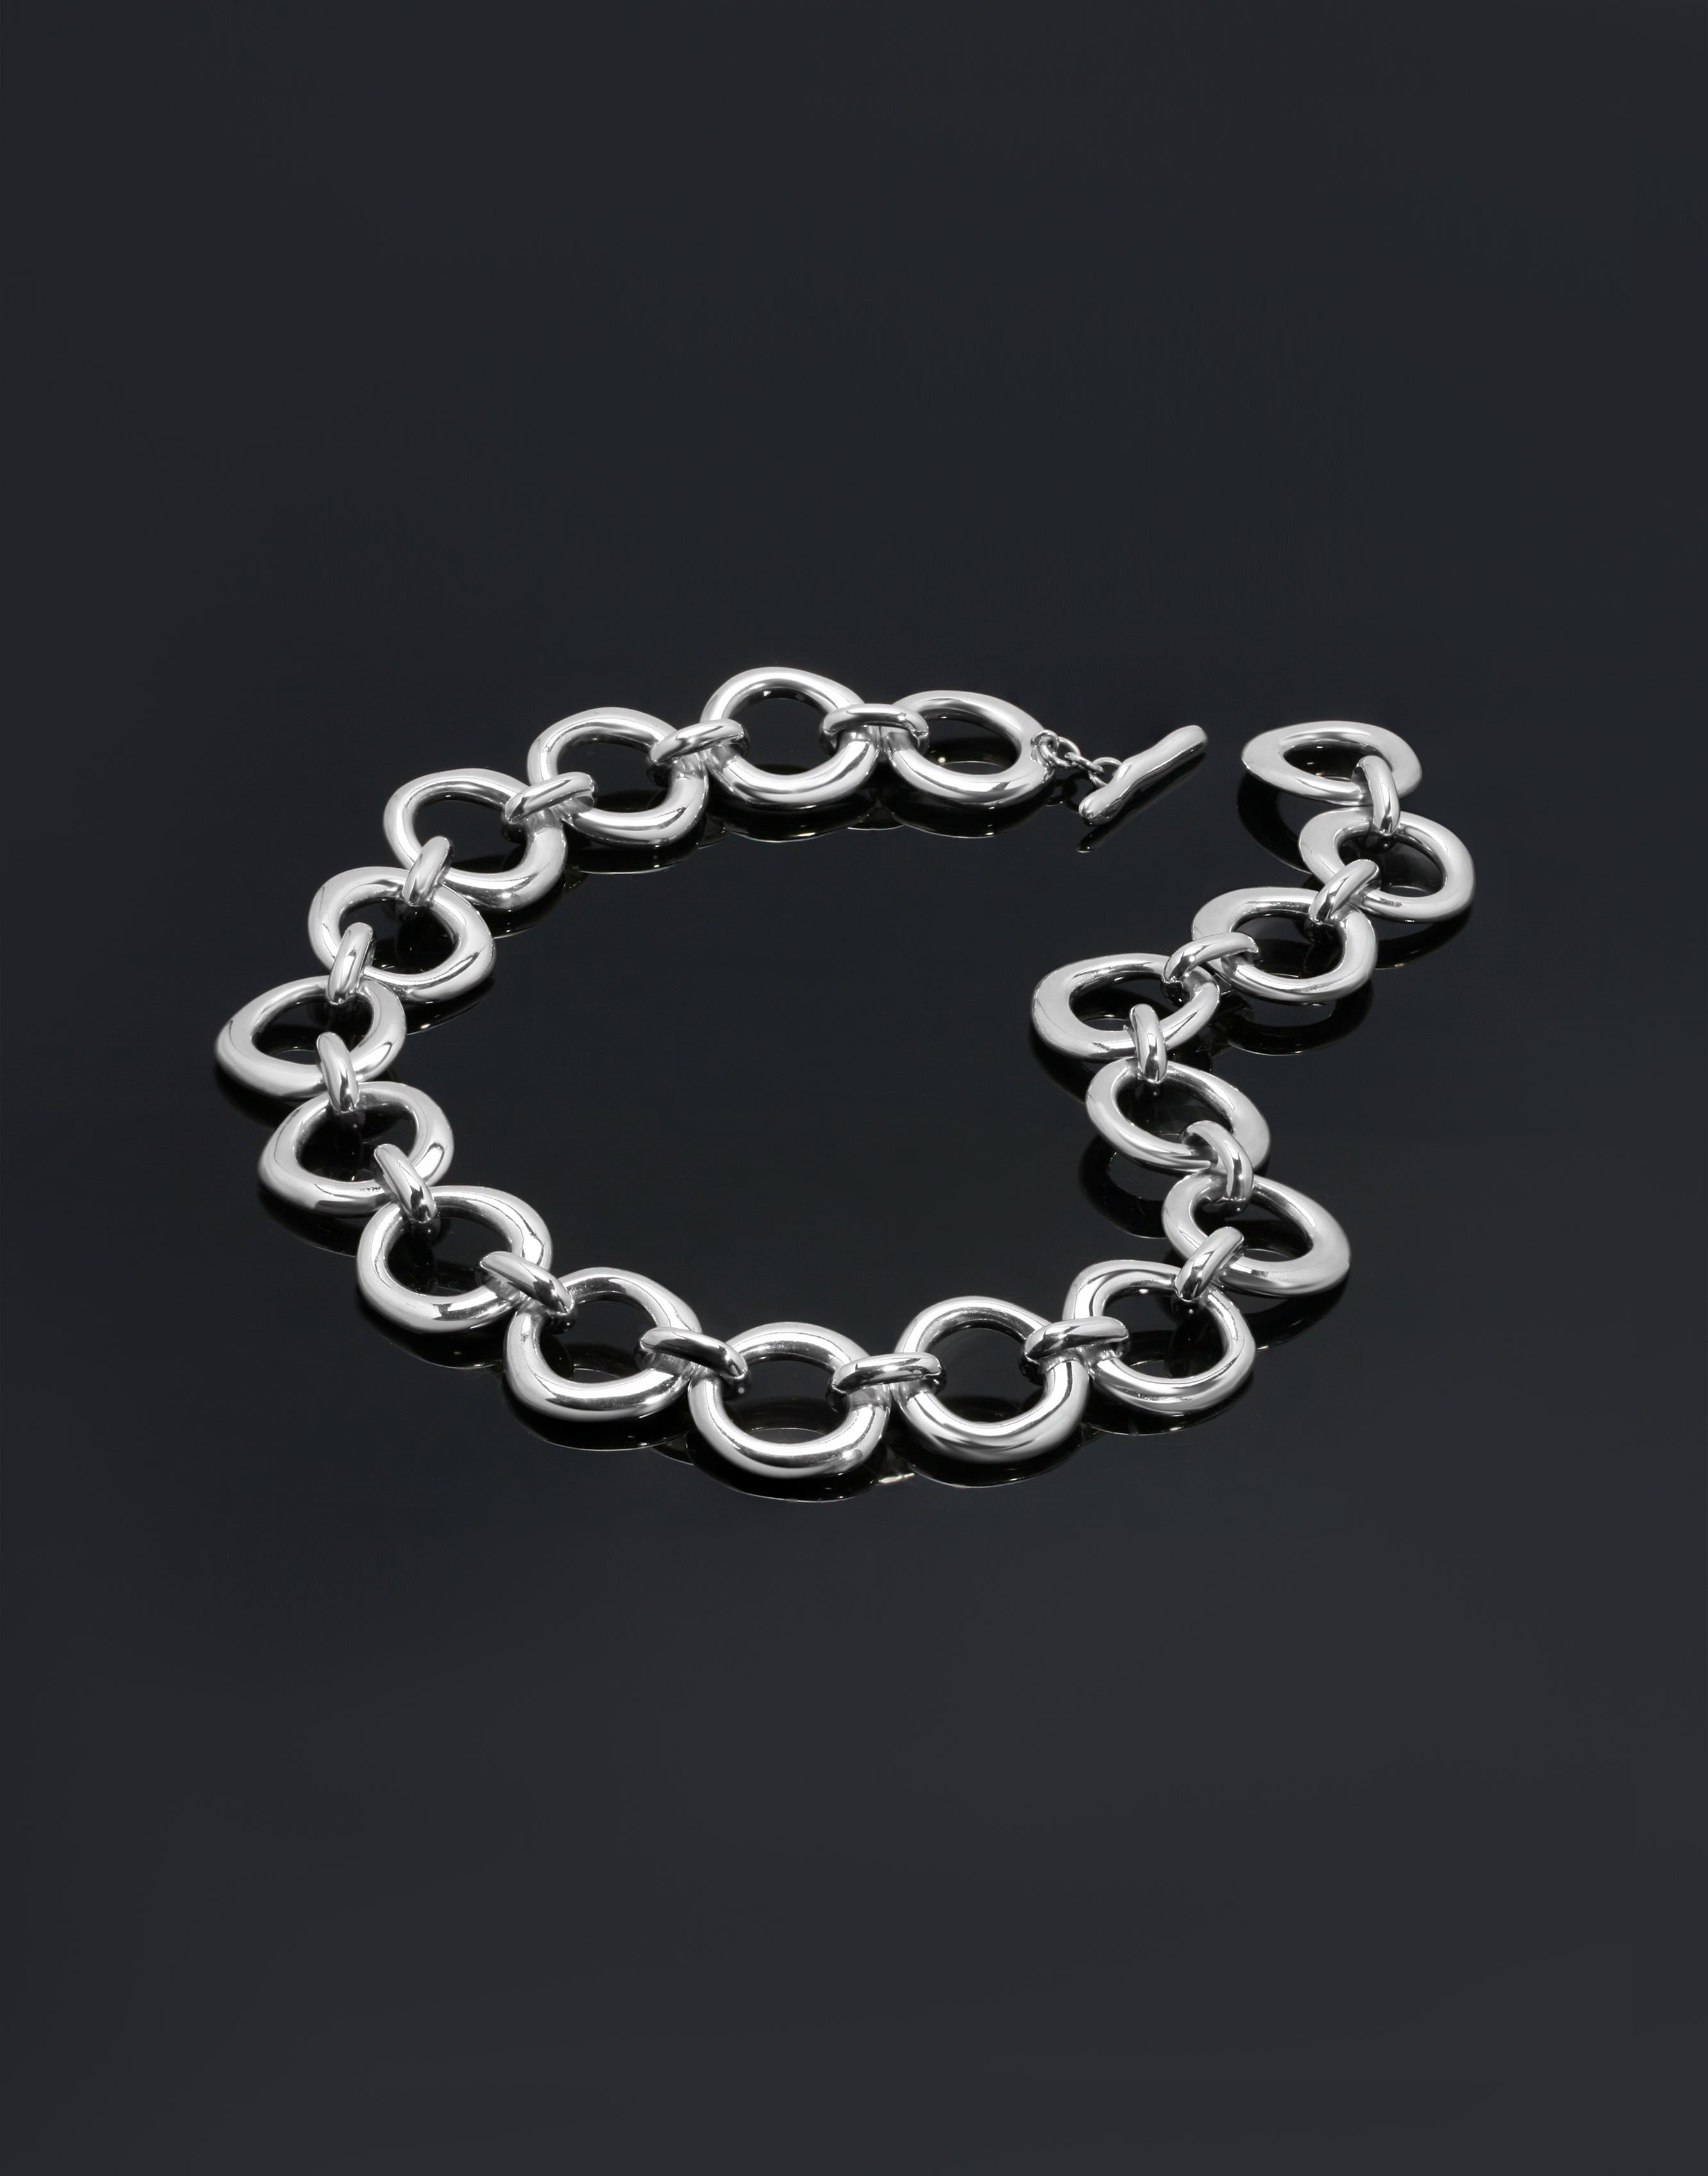 Silver】MODERN WEAVING Imperfect Circles Linked - ブレスレット